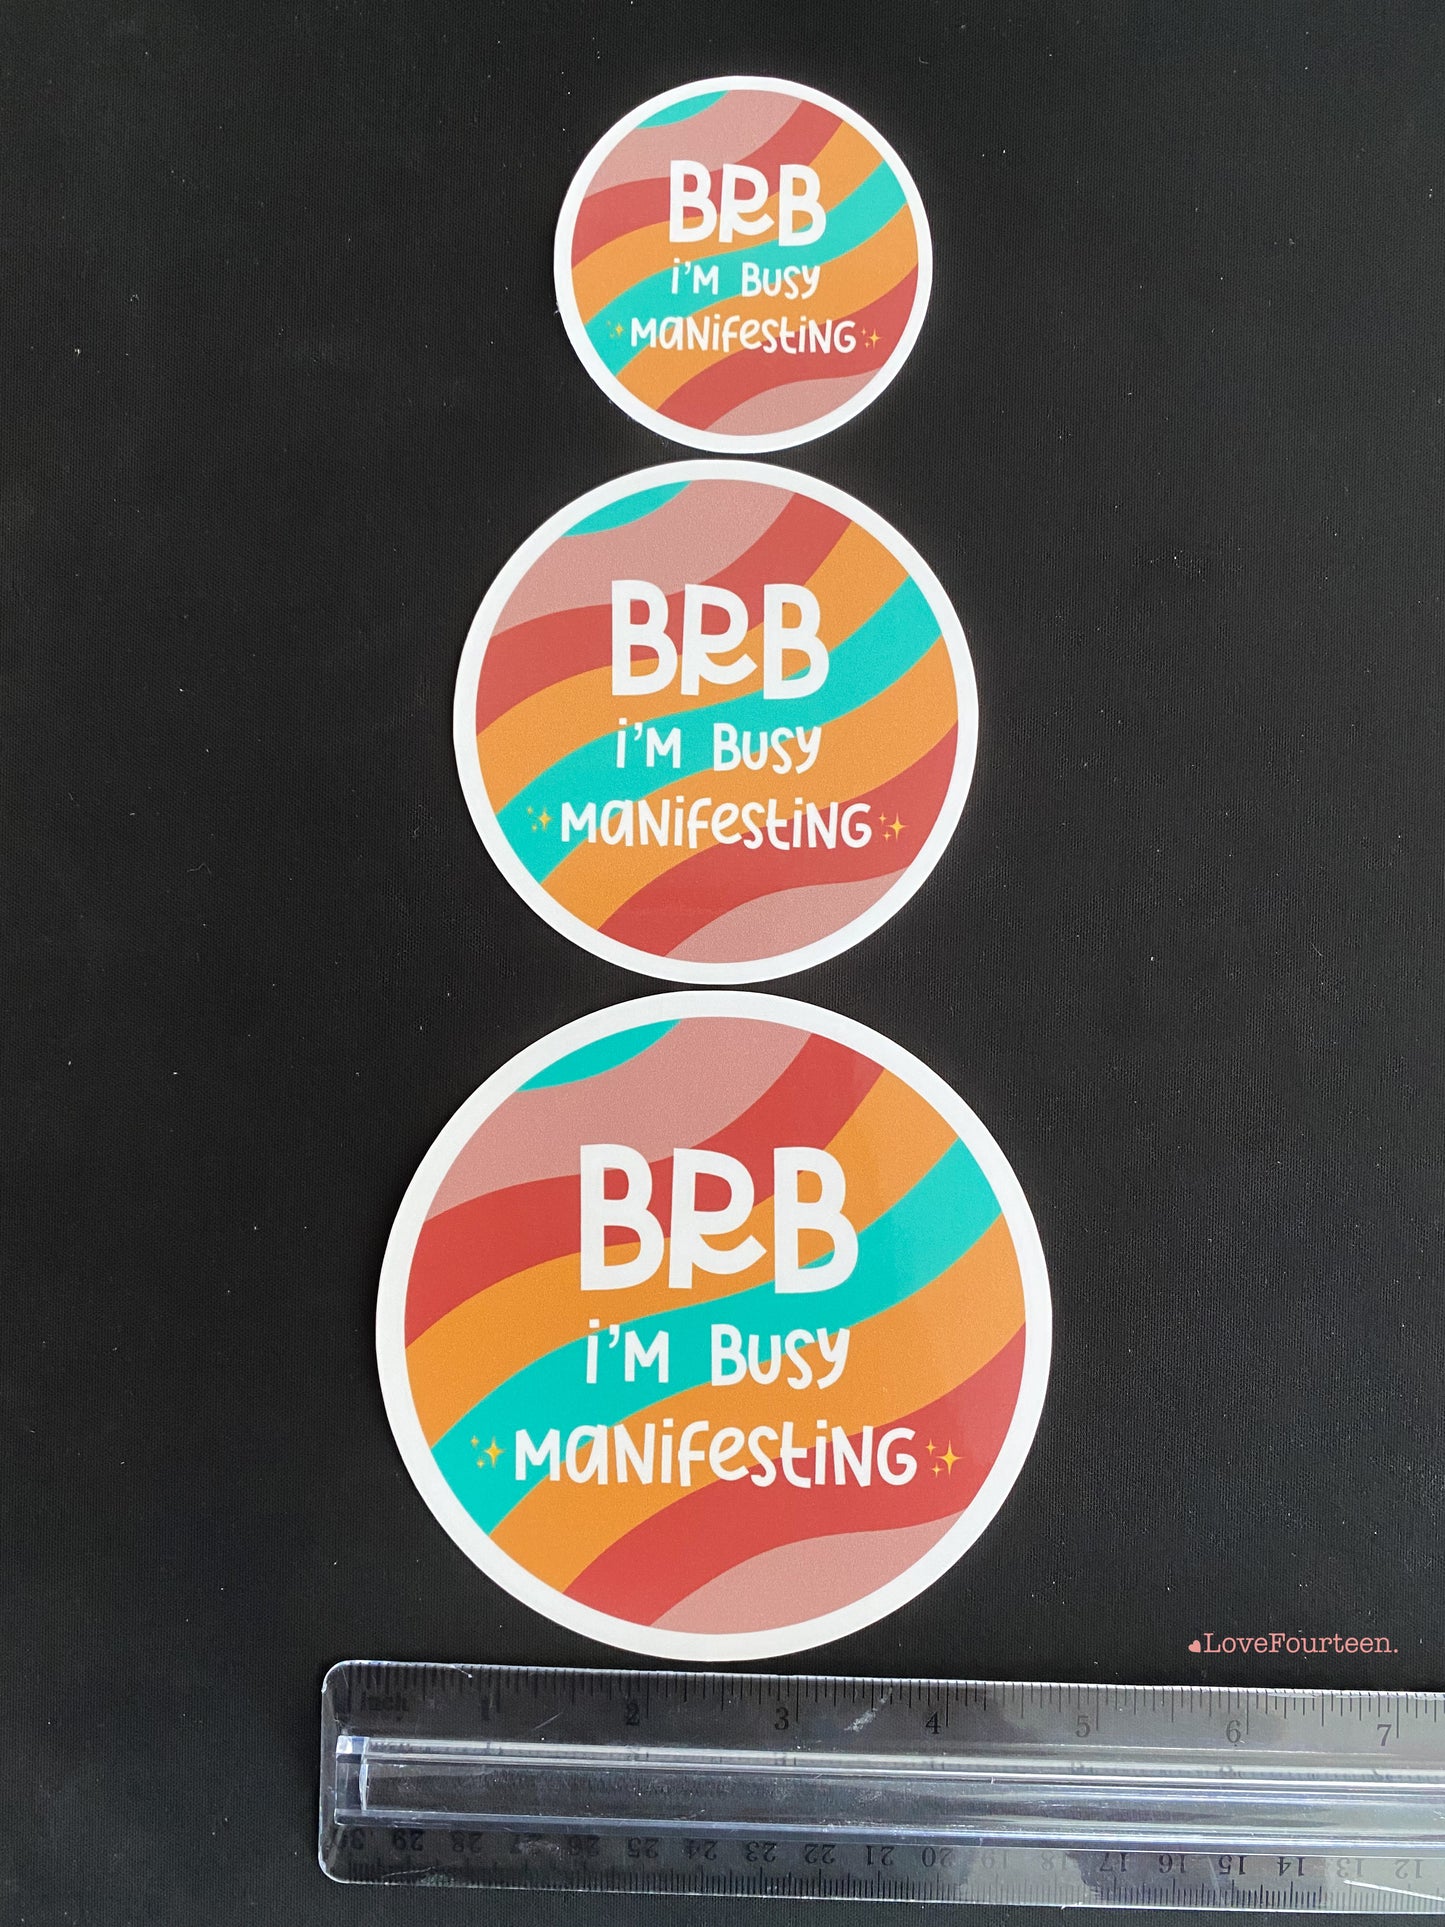 Showing the size variant for the BRB I'm busy manifesting waterproof die cut sticker with a ruler for reference